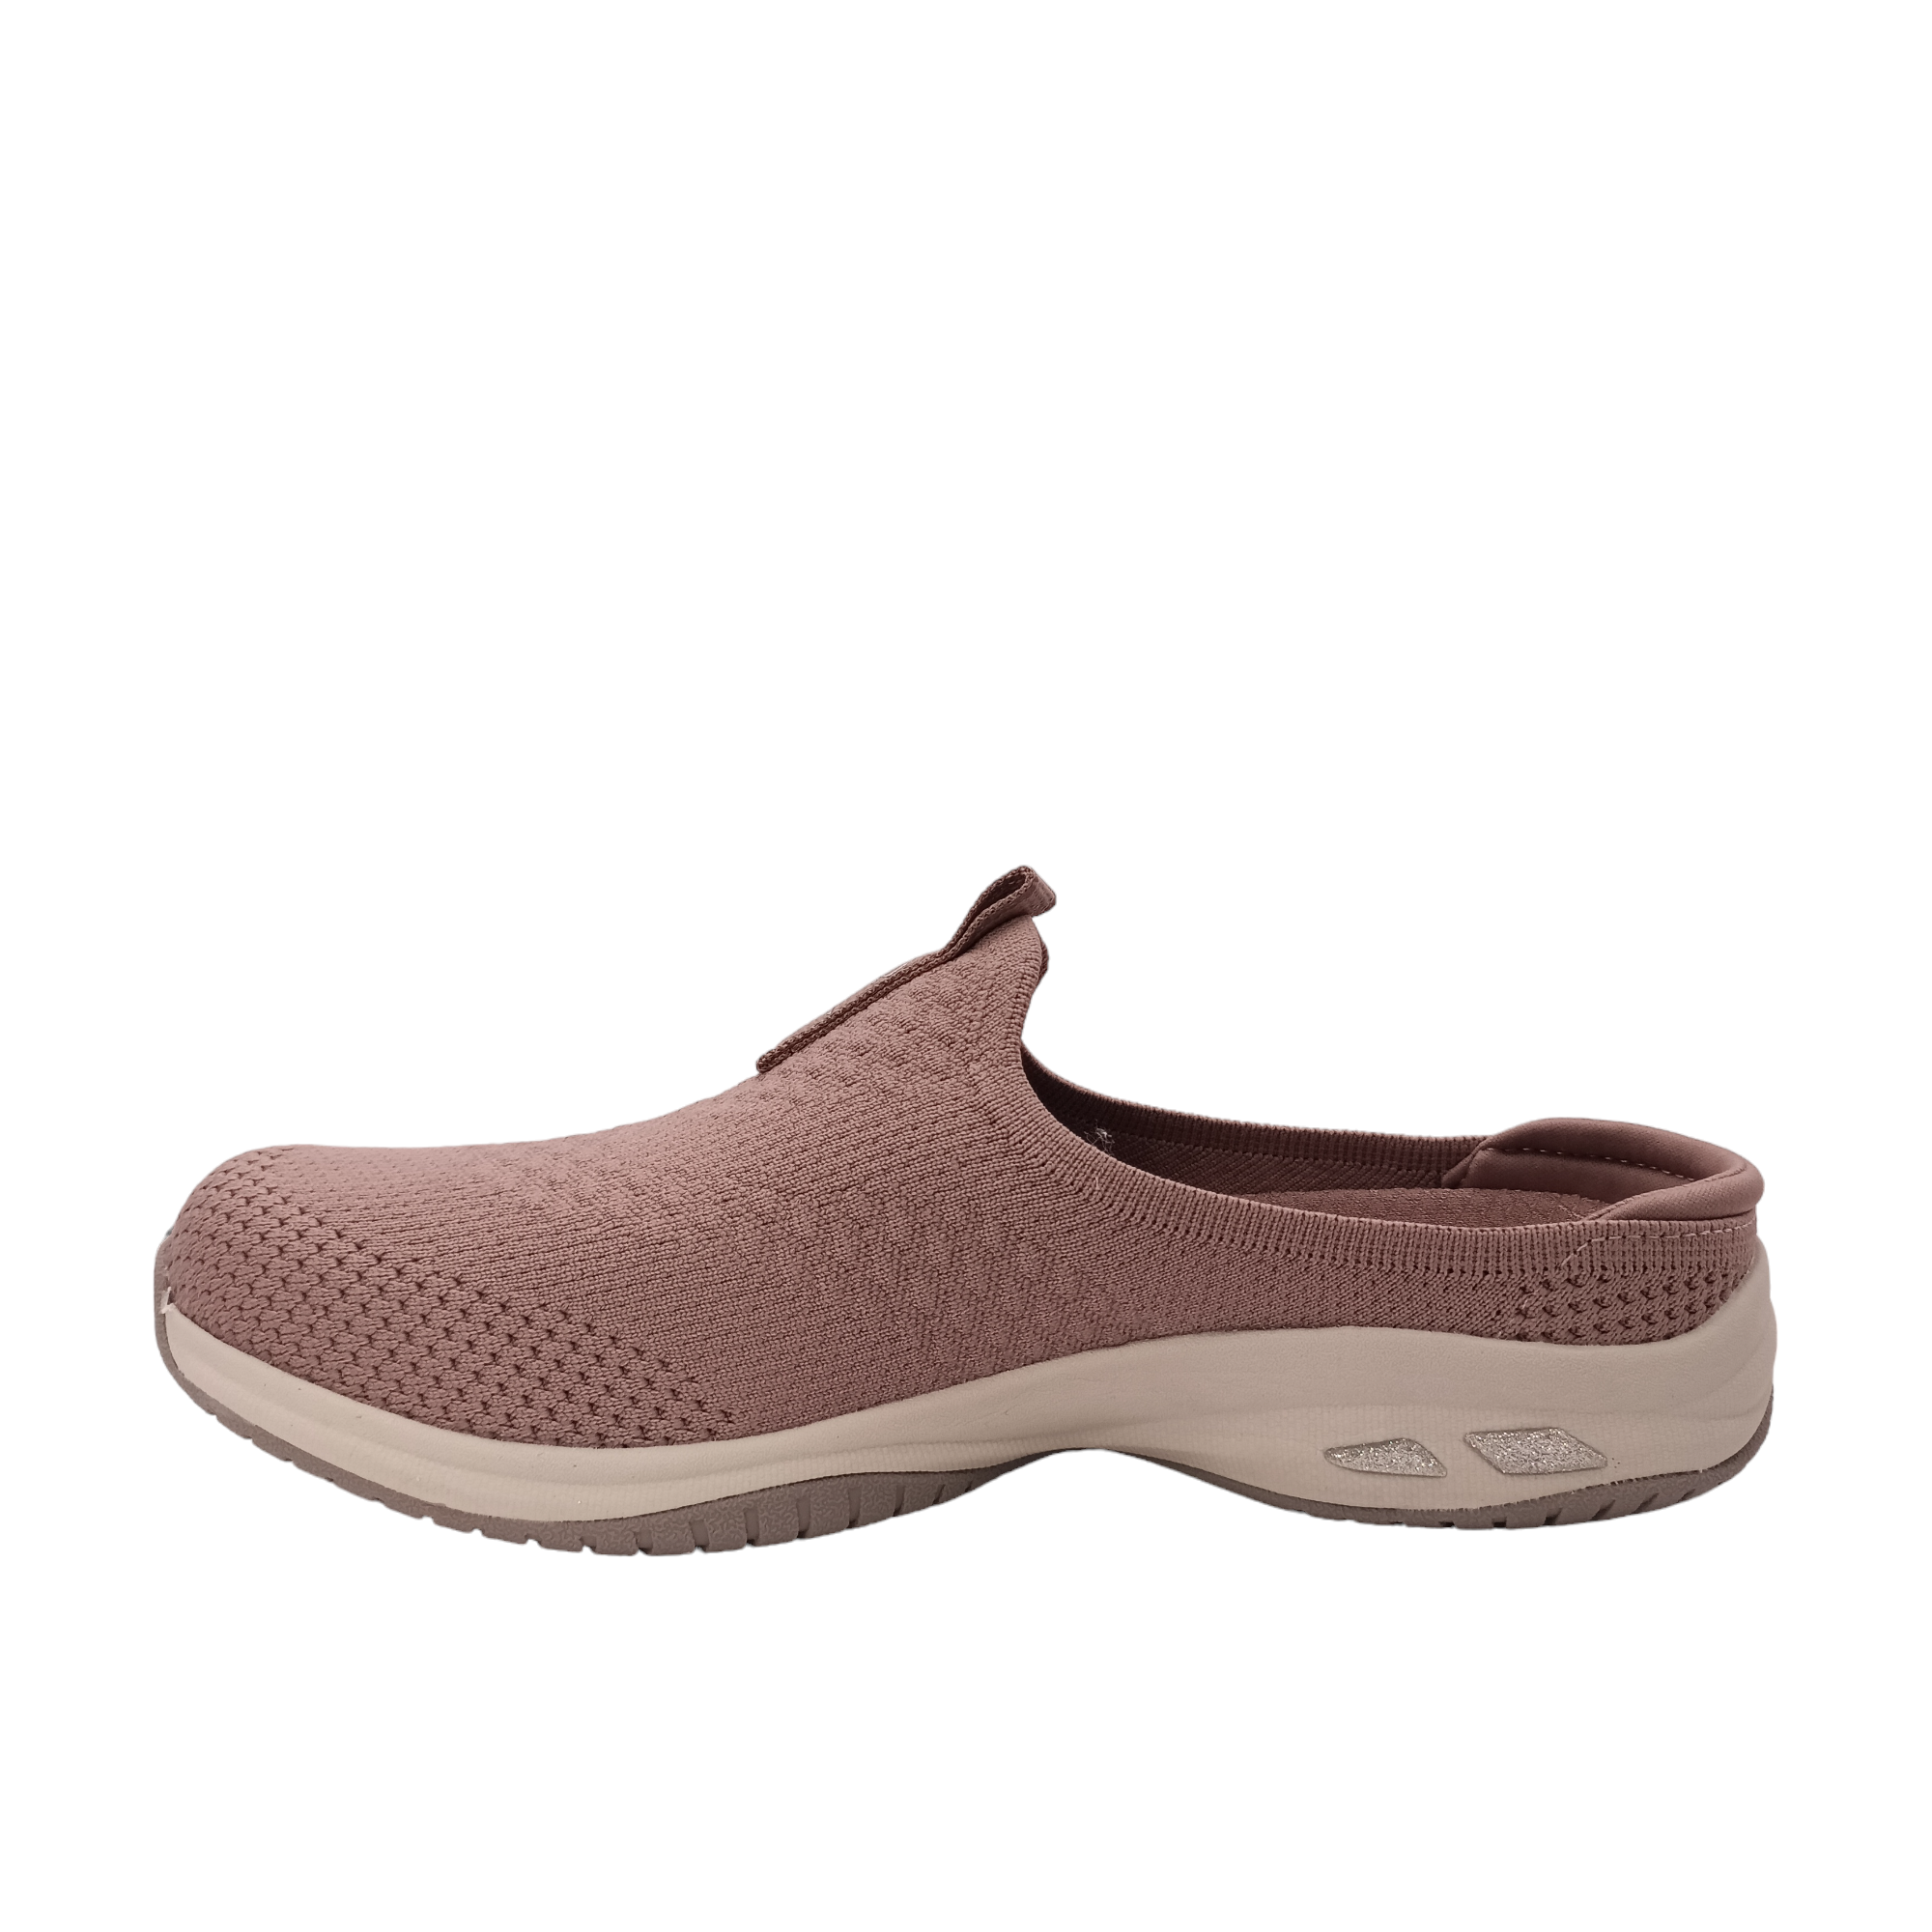 Shop Snuggle Vibes Skechers - with shoe&me - from Skechers - Mules - Slide/Scuff, Winter, Womens - [collection]